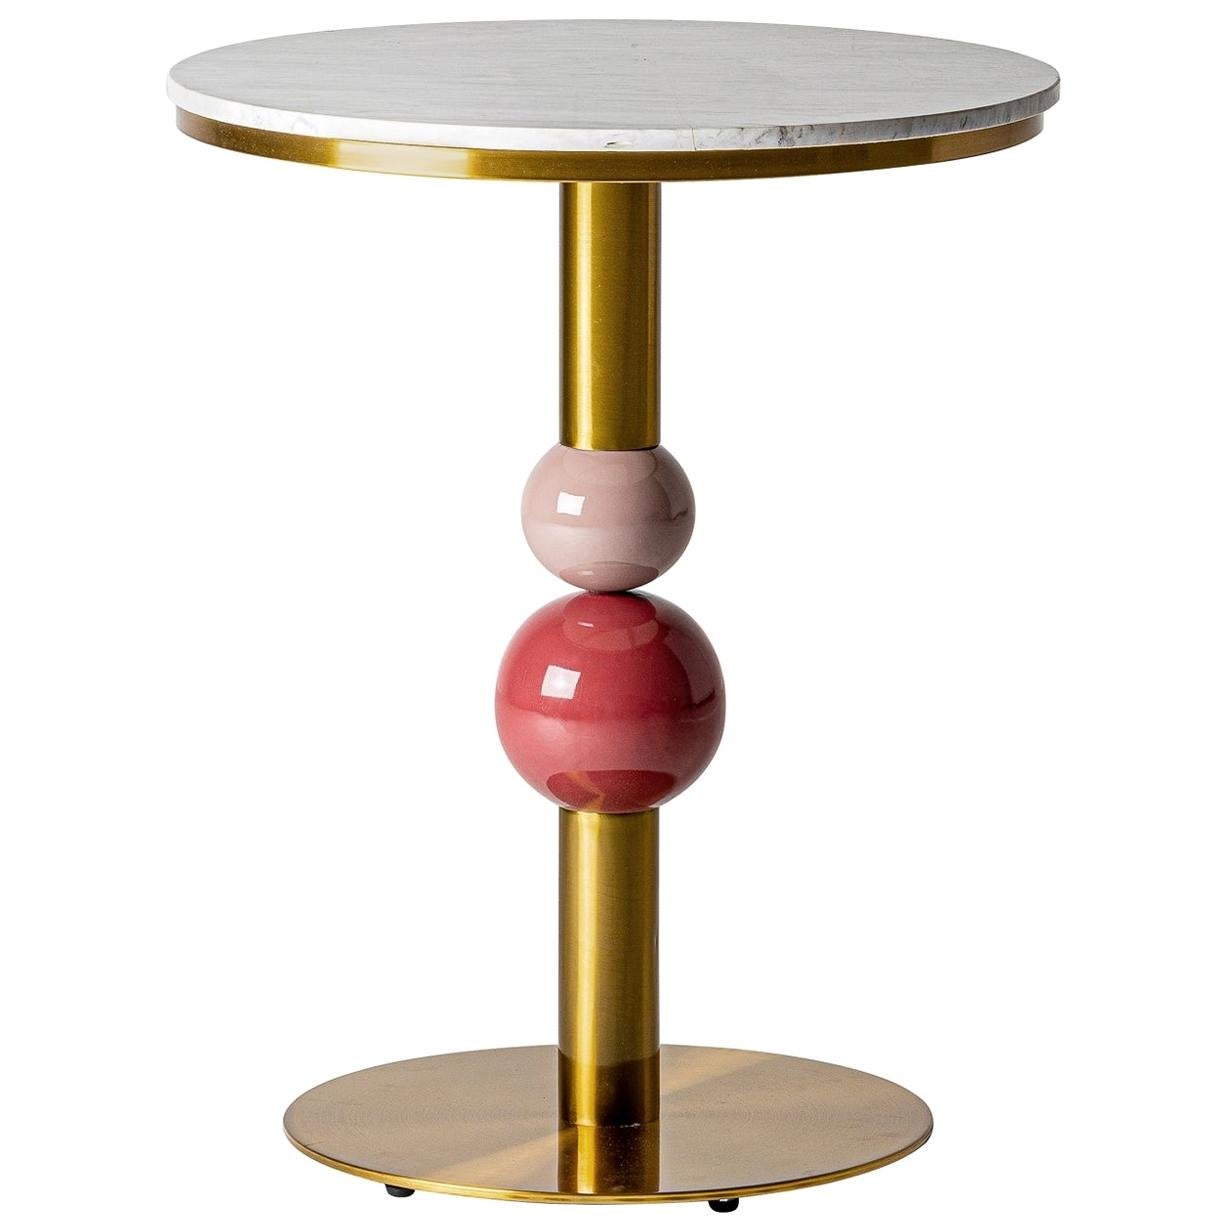 1980s Italian Design Style Round White Marble and Gilt Pedestal Table For Sale